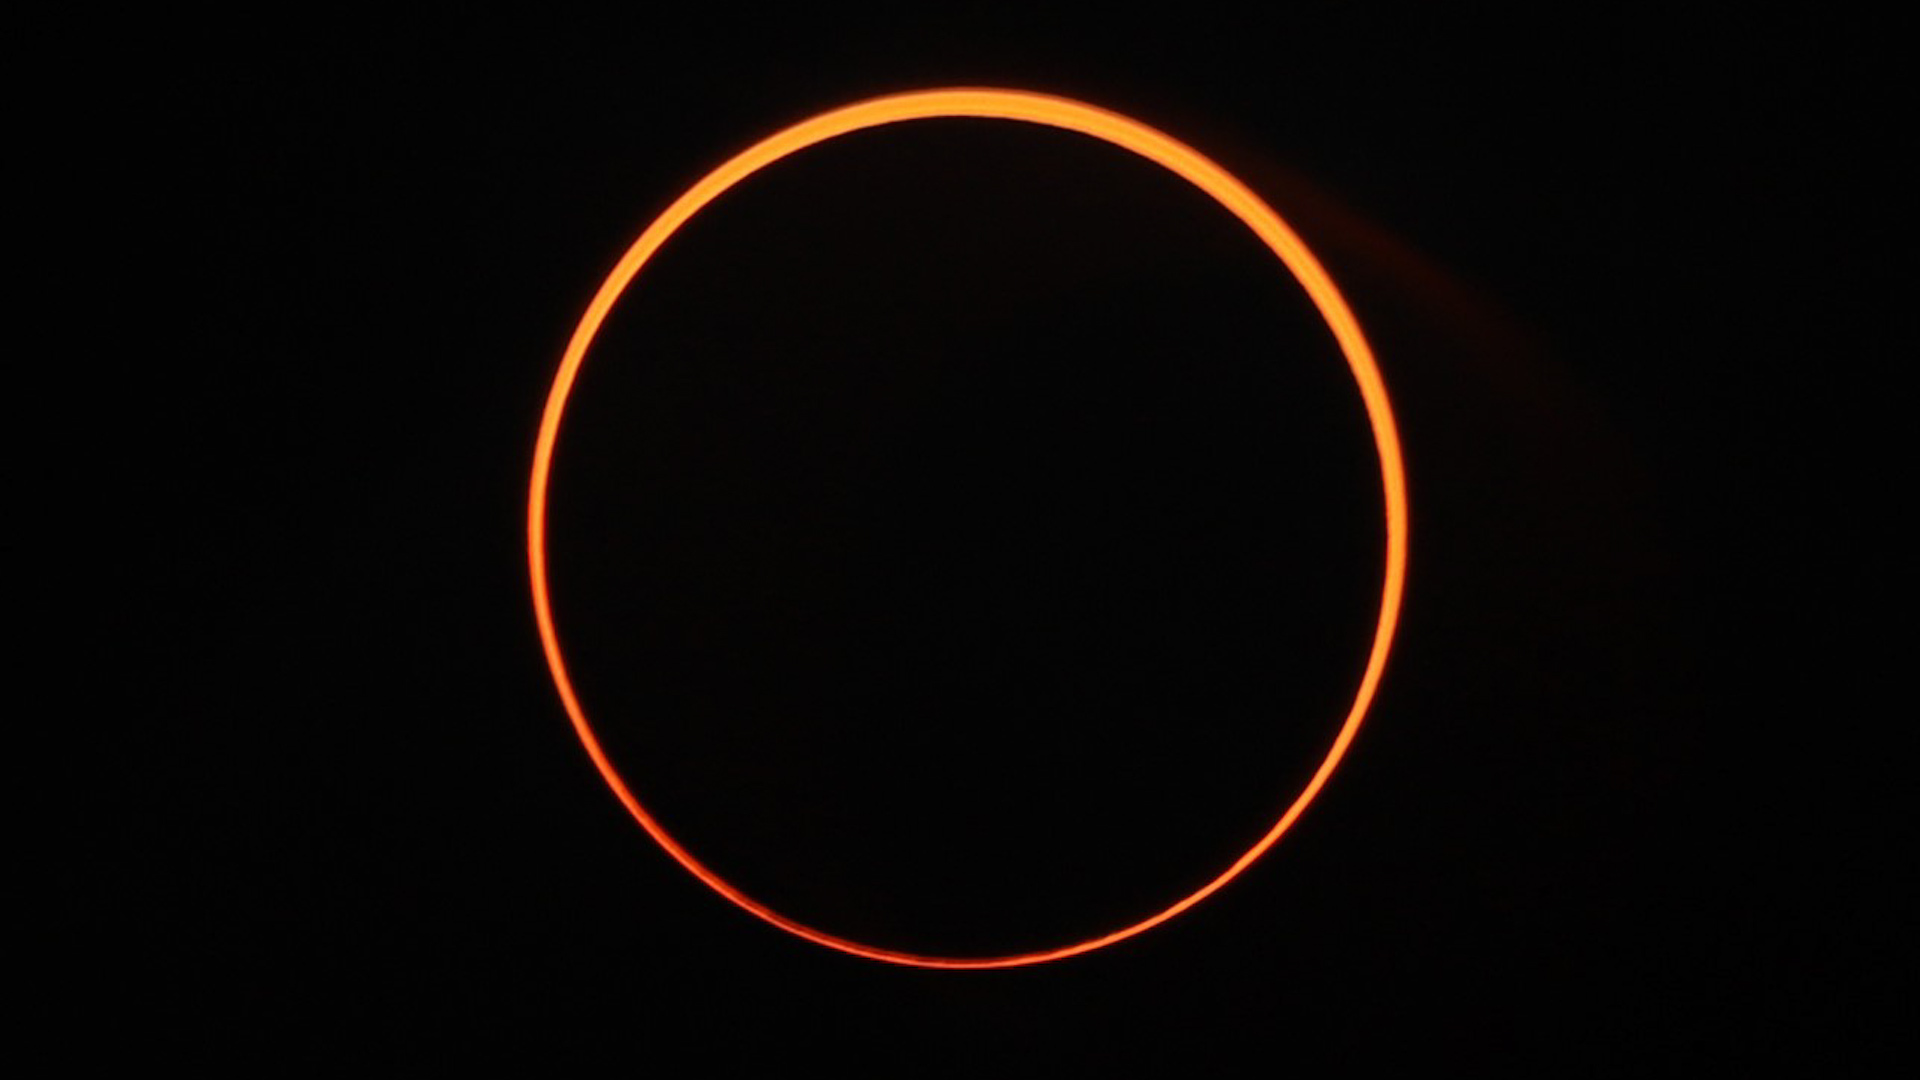 A ring of fire eclipse is when the moon partially blocks the sun. The last time it was visible from the U.S. was in 2012.